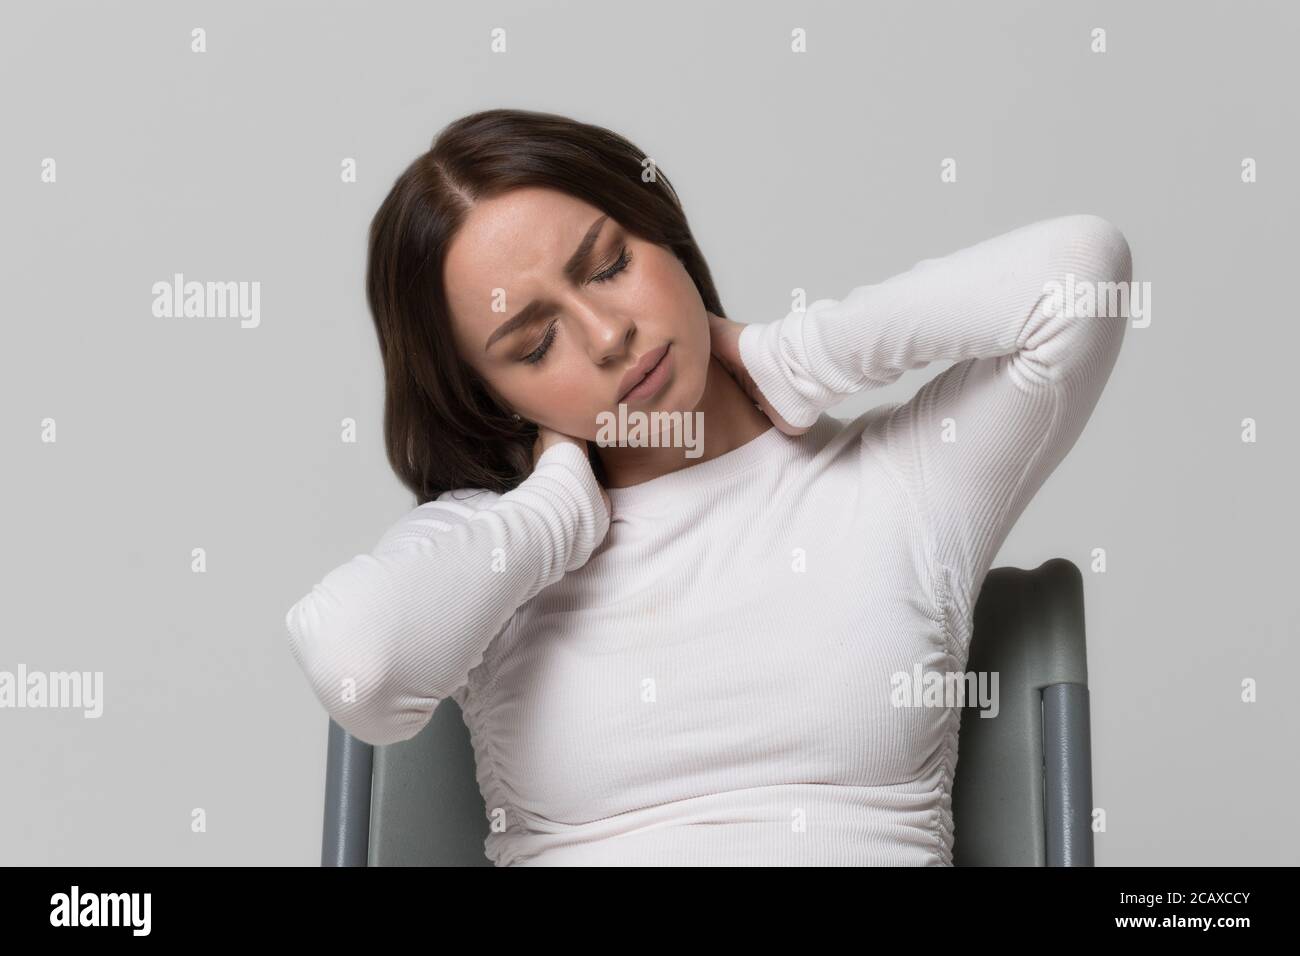 Closeup portrait of unhealthy female massages painful neck pain and back. Cervical arthritis, osteochondrosis, diseases of the musculoskeletal system Stock Photo